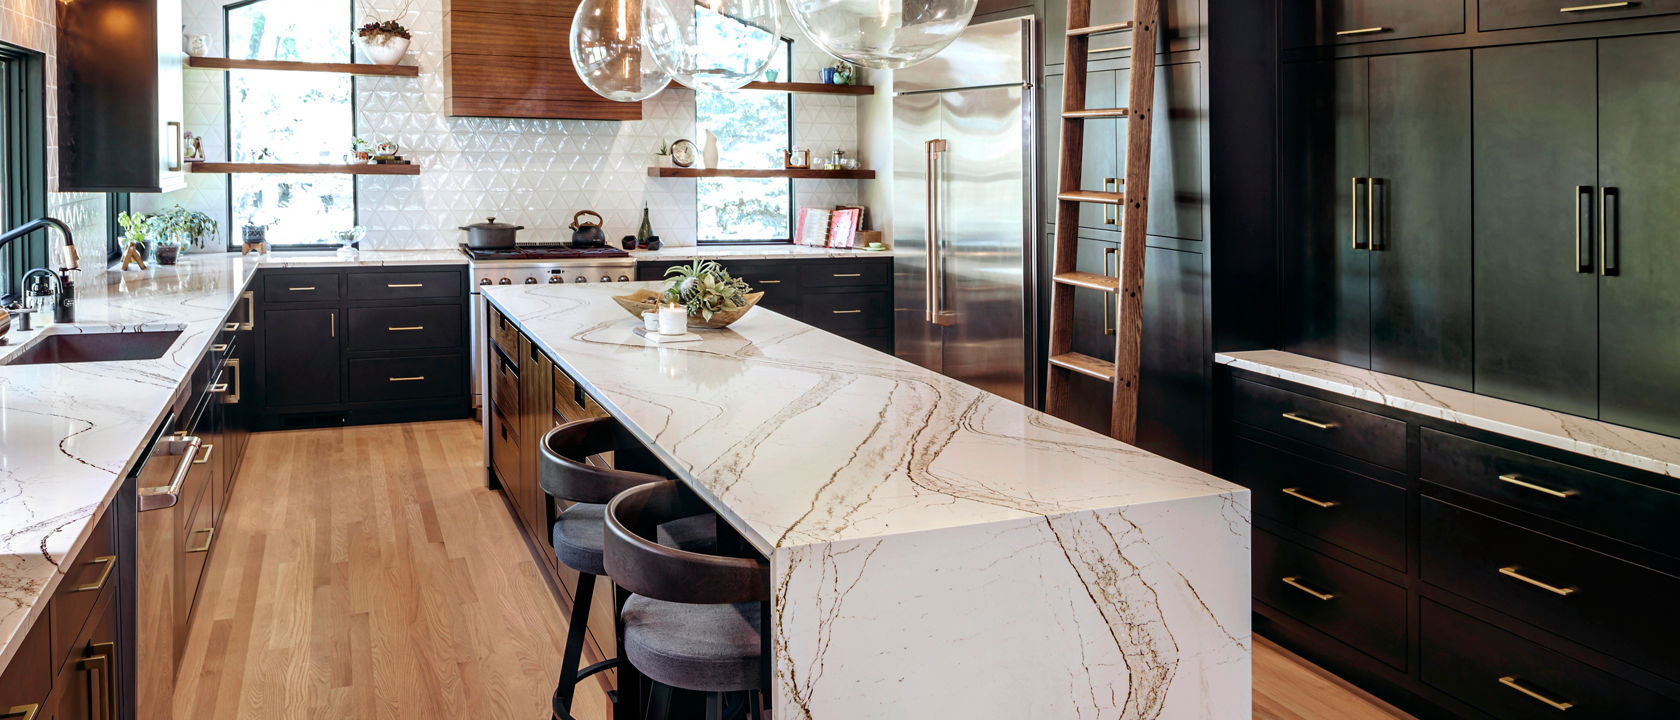 Cambria Clovelly quartz waterfall countertop in kitchen